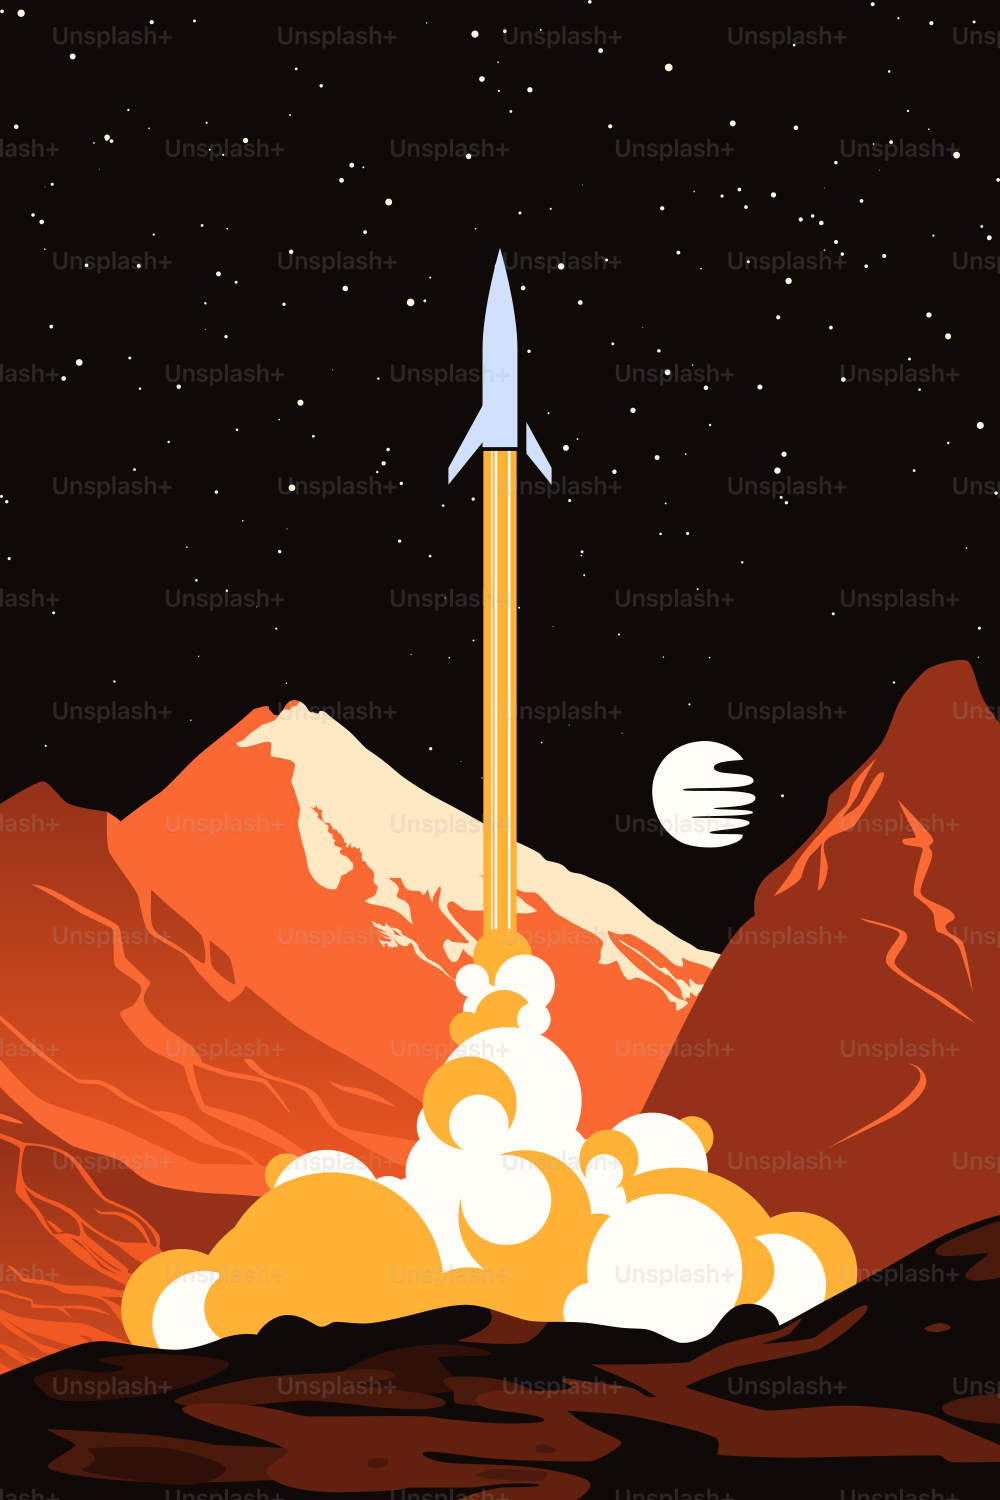 Mars Human Exploration Poster. Spaceship Taking Off. Distant Sun in the Dark Skies Full of Stars.